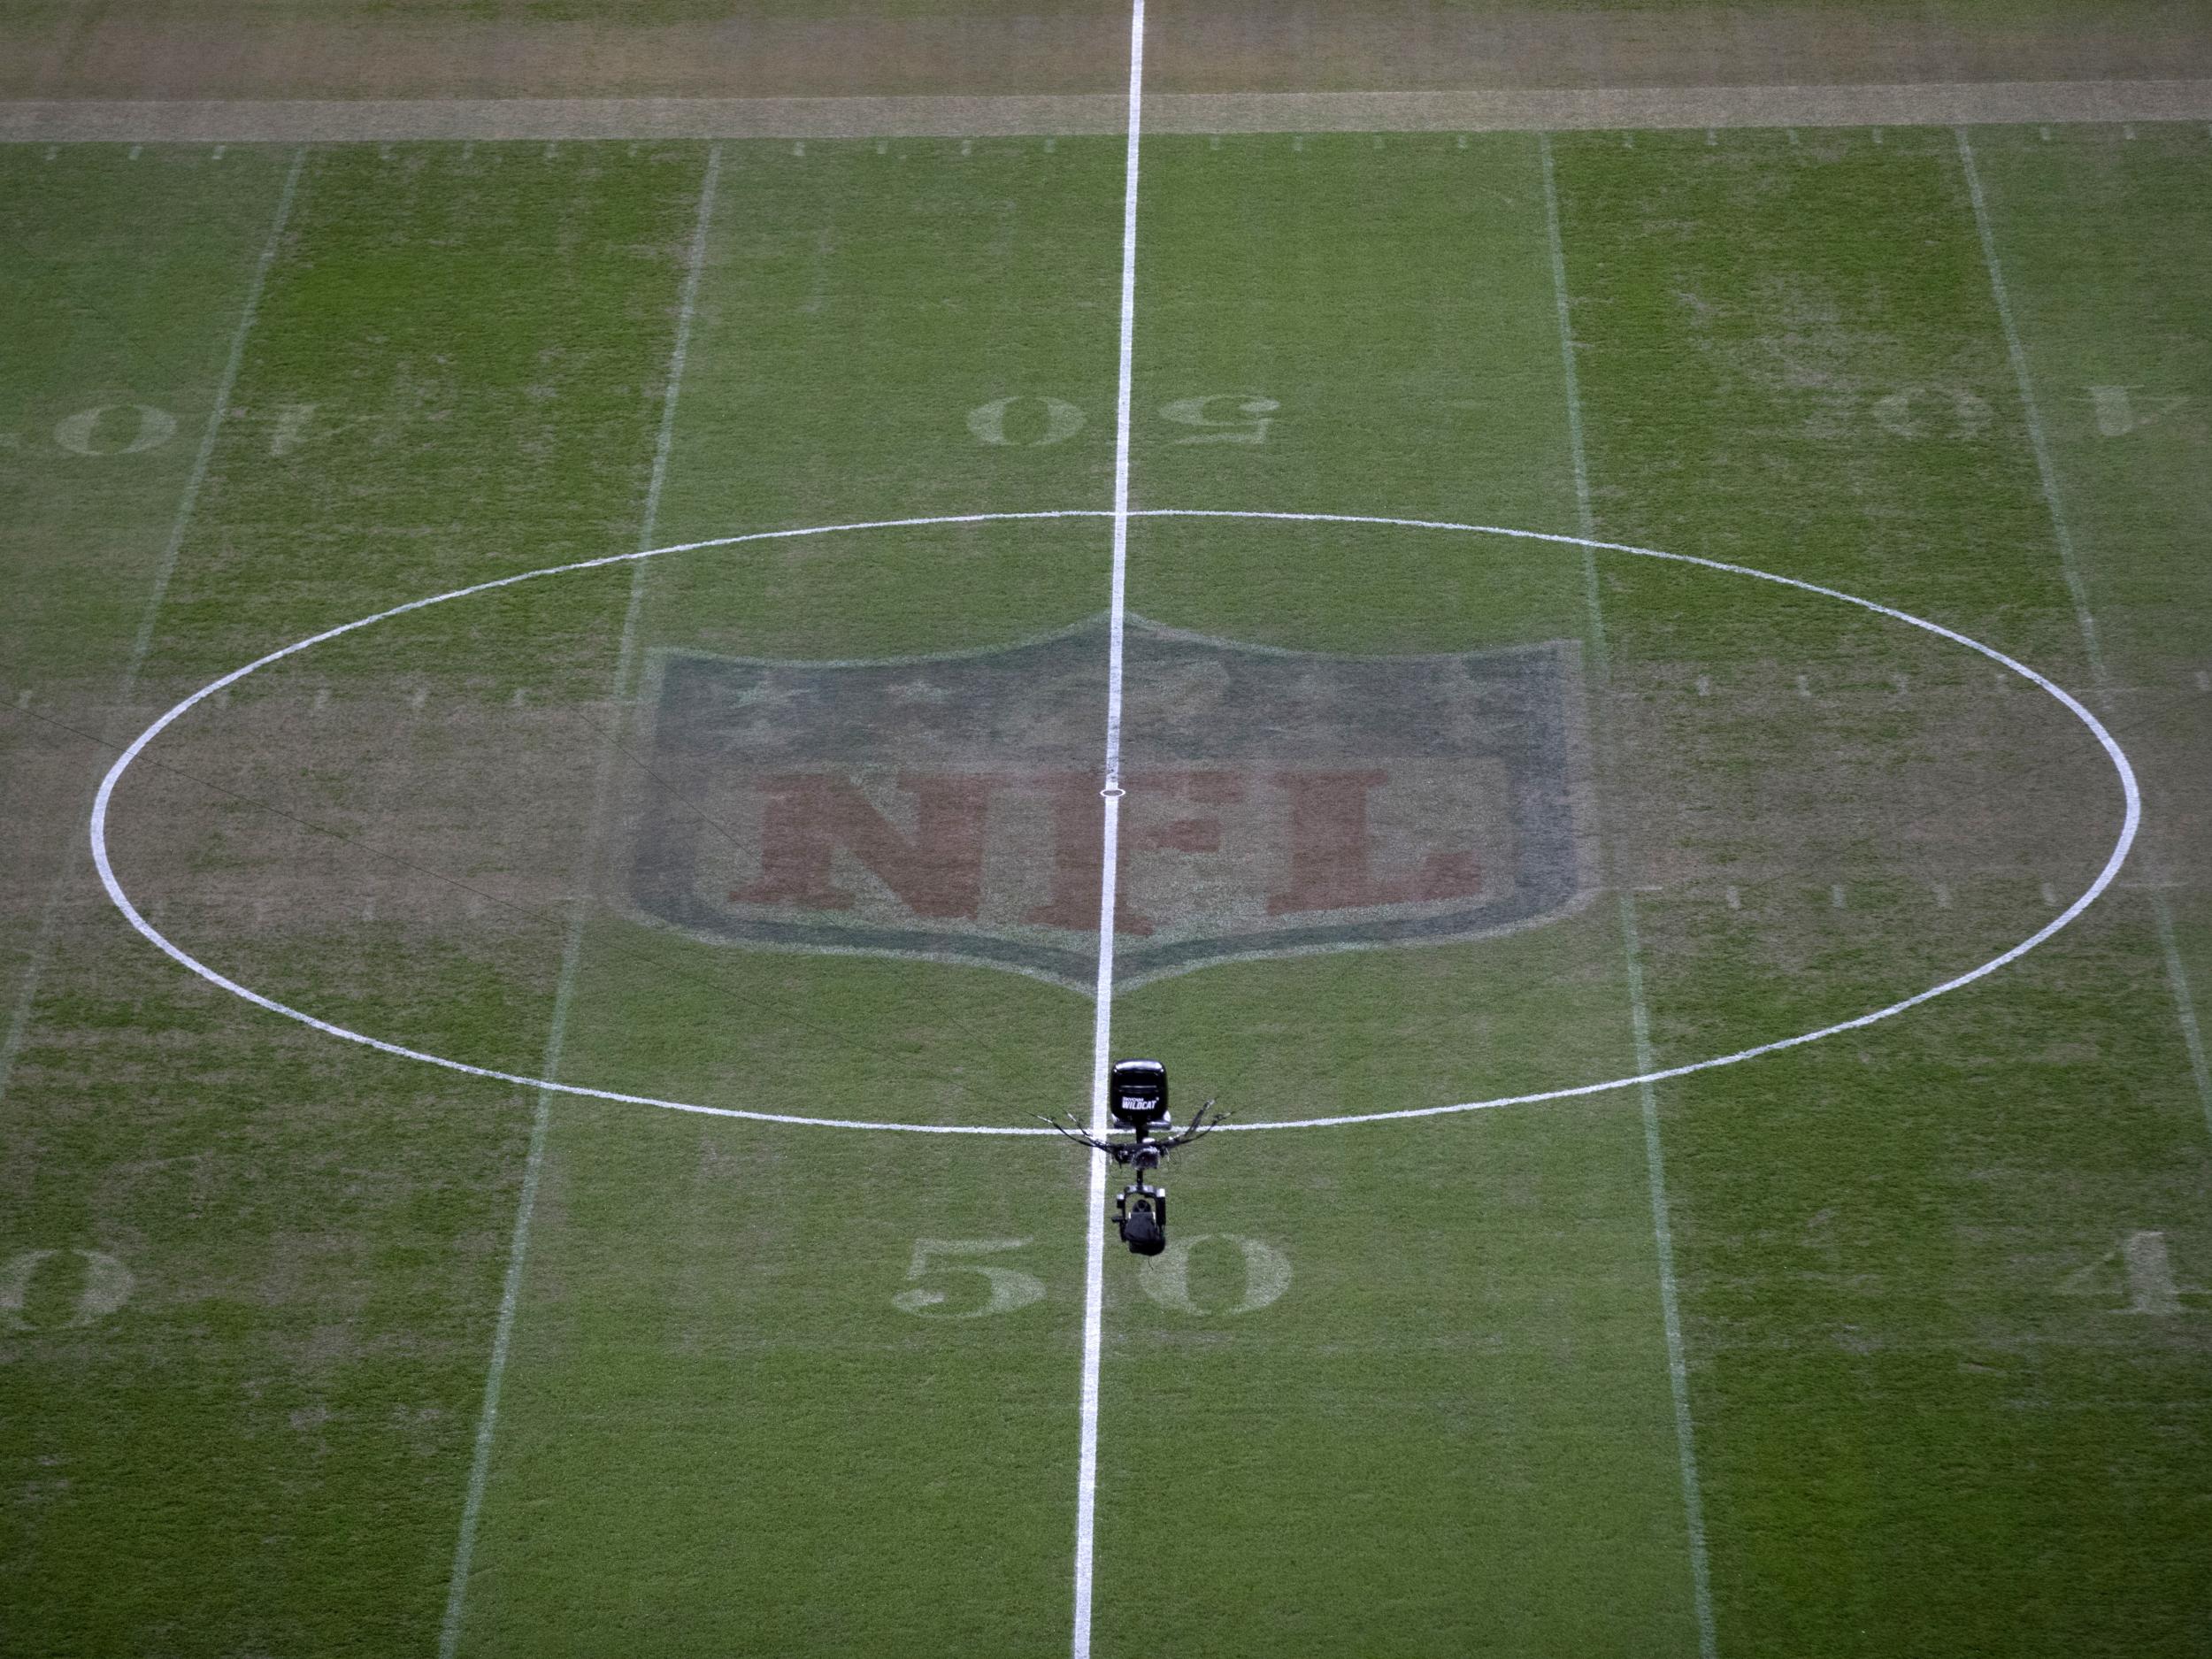 Hosting multiple sporting events is taking its toll on the Wembley pitch